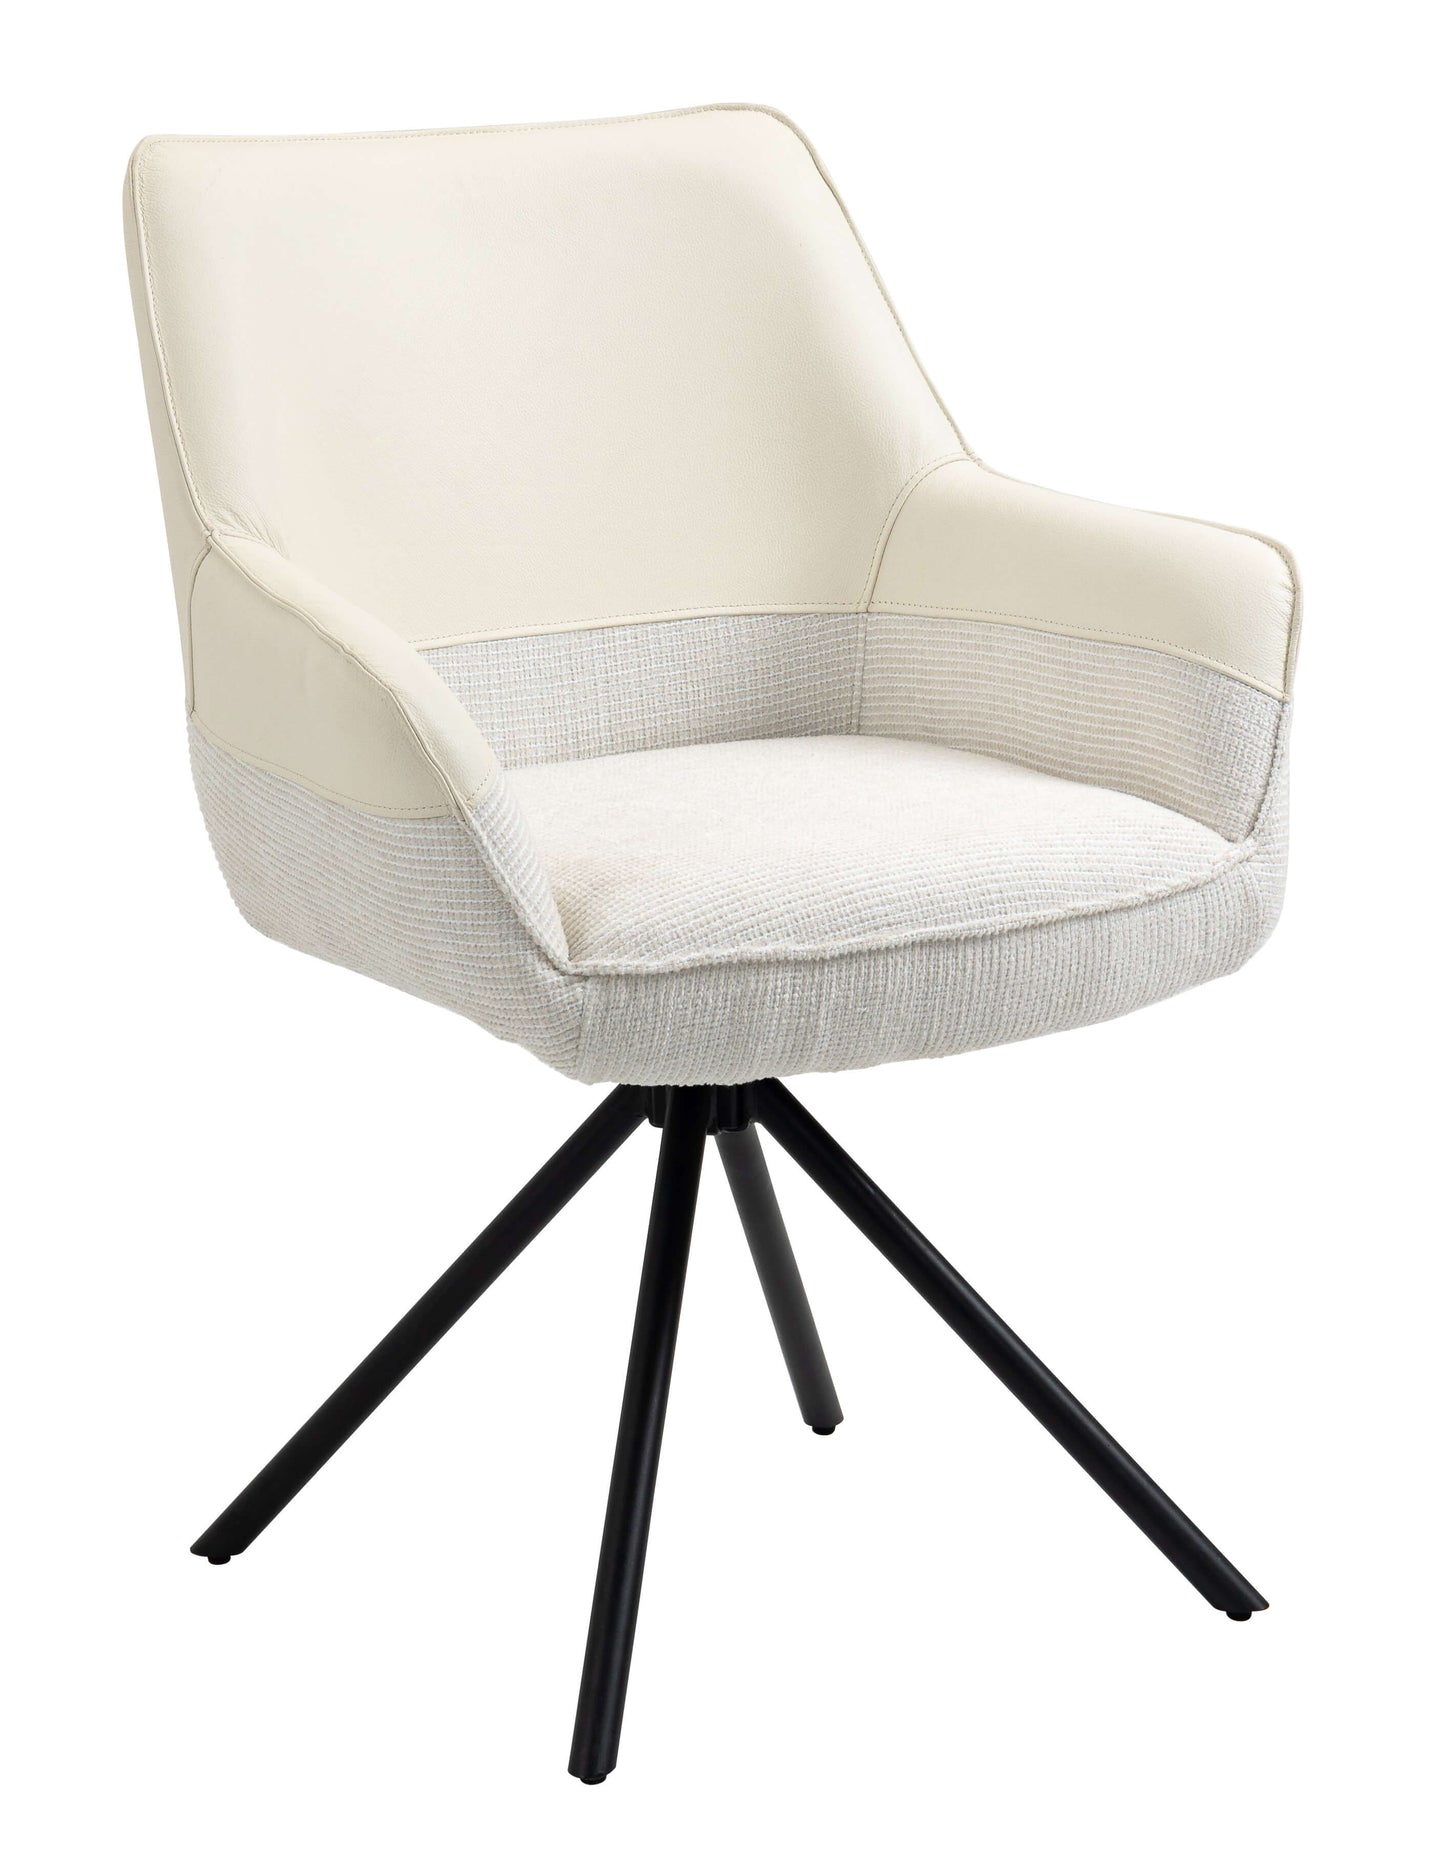 Carnarvon | Modern Leather Fabric Swivel Dining Chair With Arms | Set Of 2 | Pearl